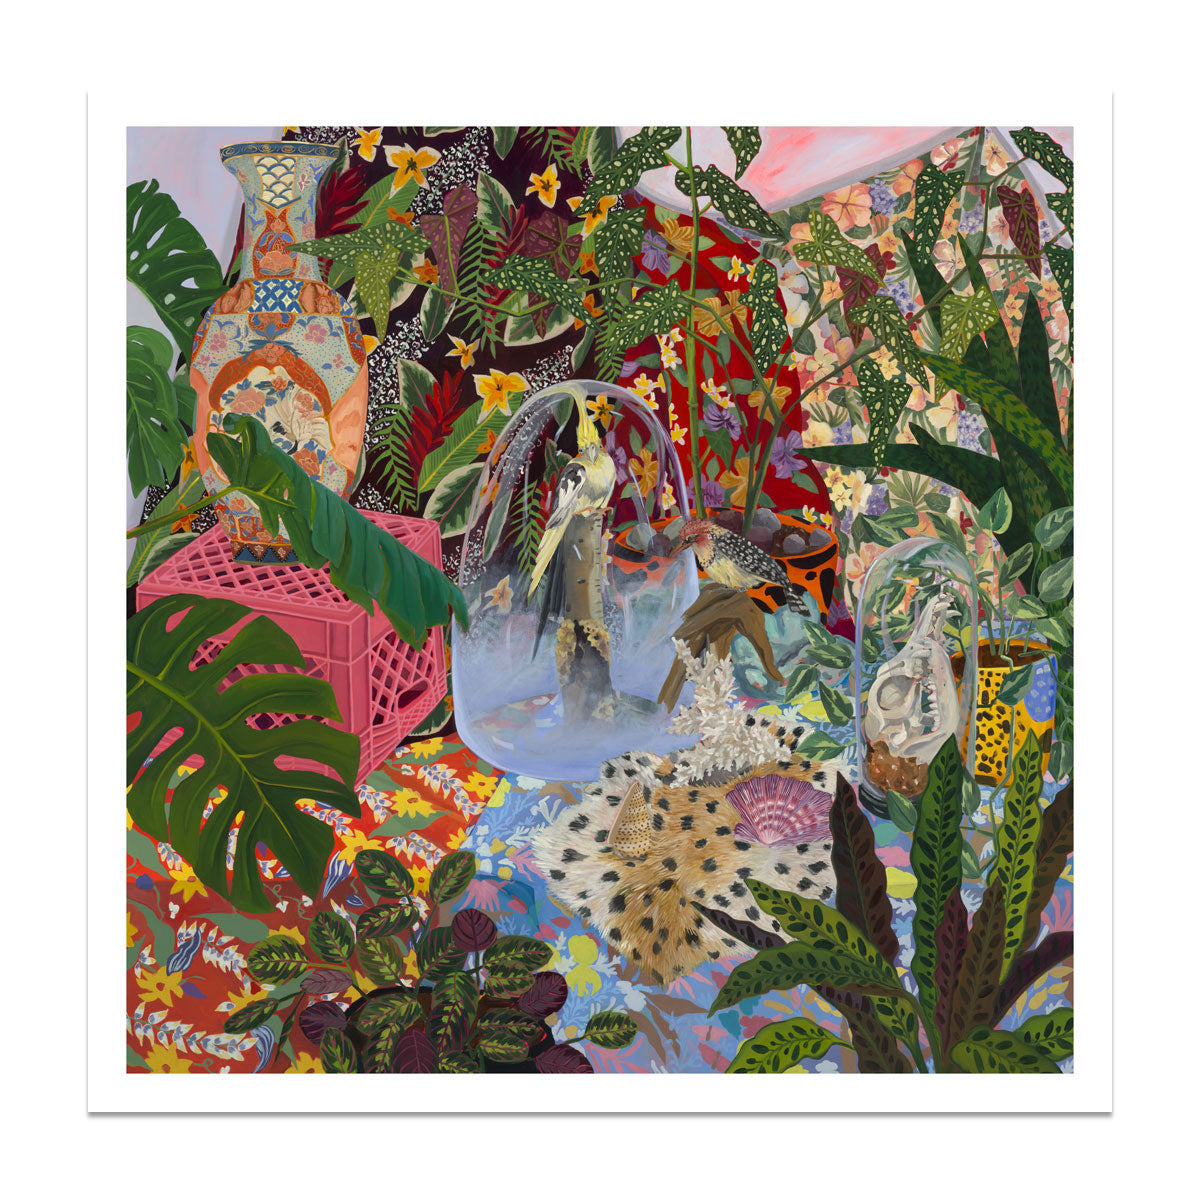 Print by Anna Valdez featuring a still life of birds and plants.